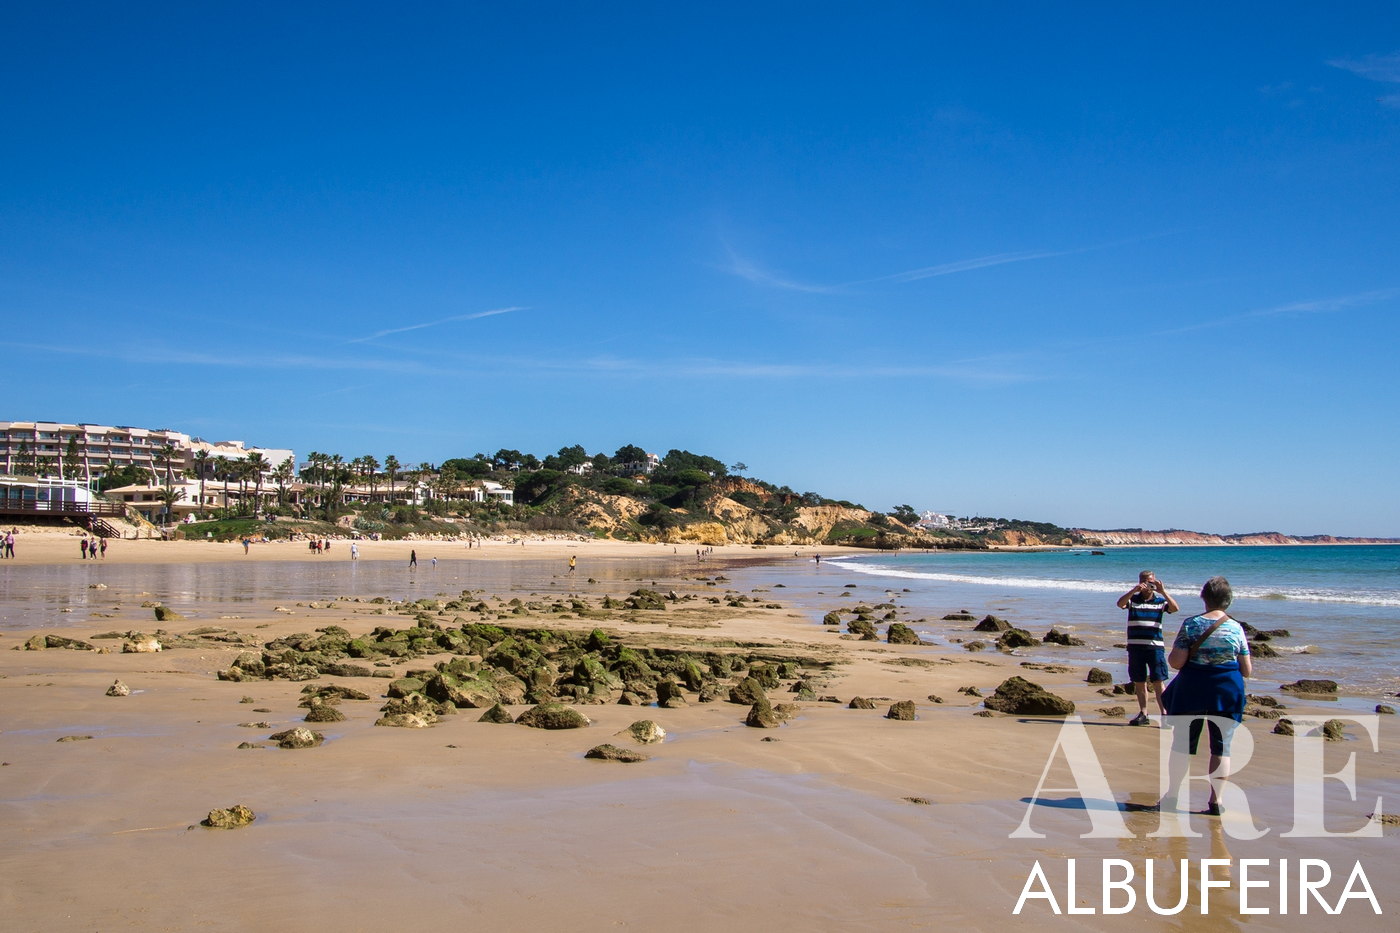 view of Santa Eulalia Beach with the distant Praia da Falésia visible on the horizon. Low tide reveals striking green rocks adorned with limes, contrasting against the lengthy stretch of sandy beach.